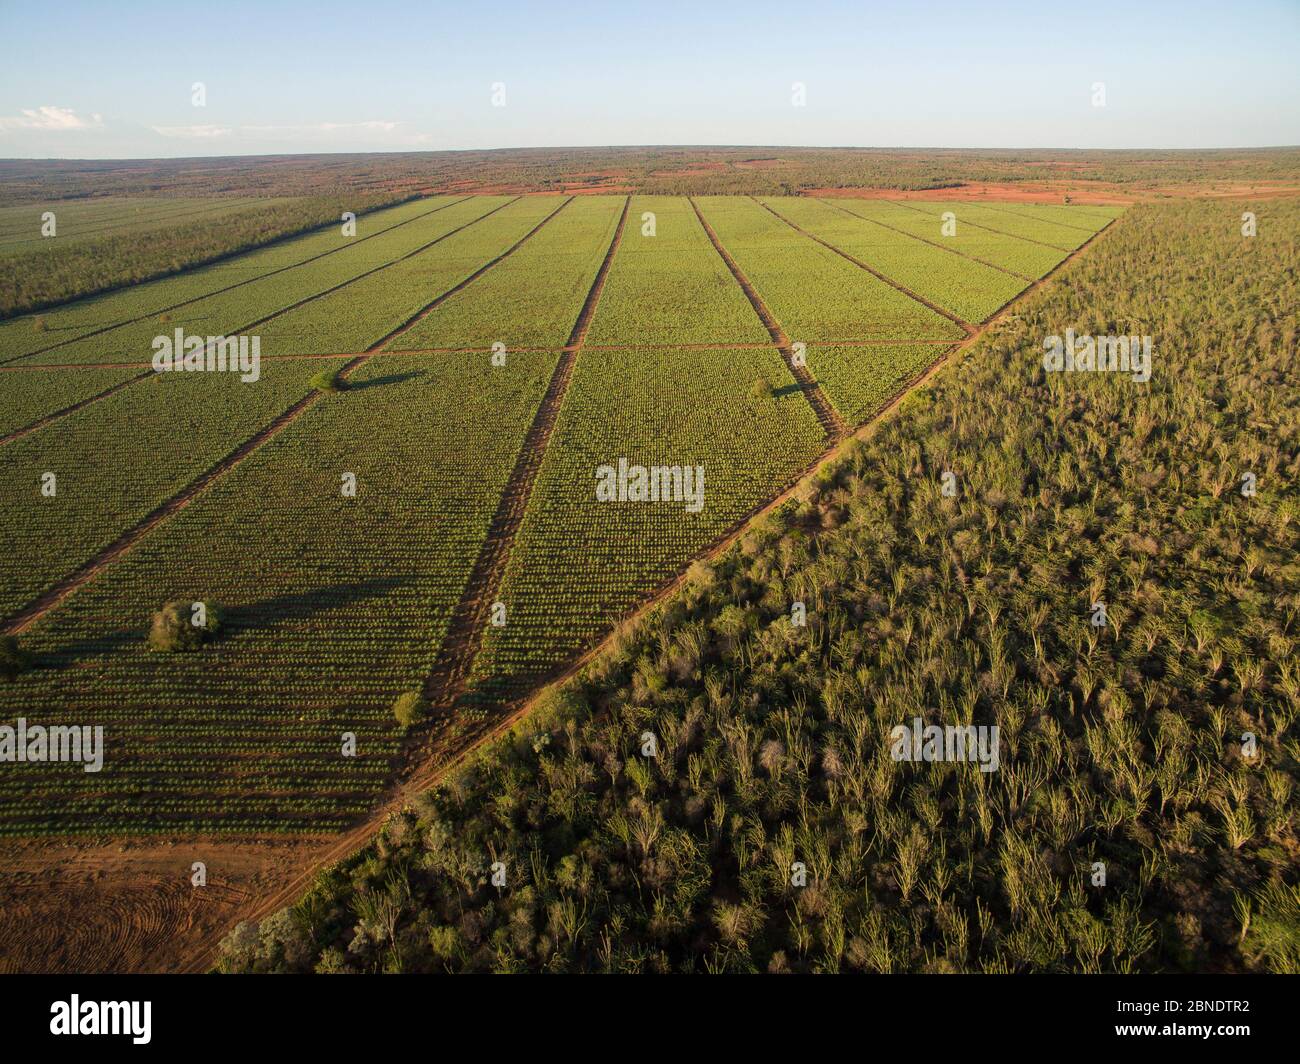 Aerial view of Sisal (Agave sisalana) plantation alongside spiny forest containing Octopus trees (Didiera madagascariensis) Berenty, Madagascar, Octob Stock Photo